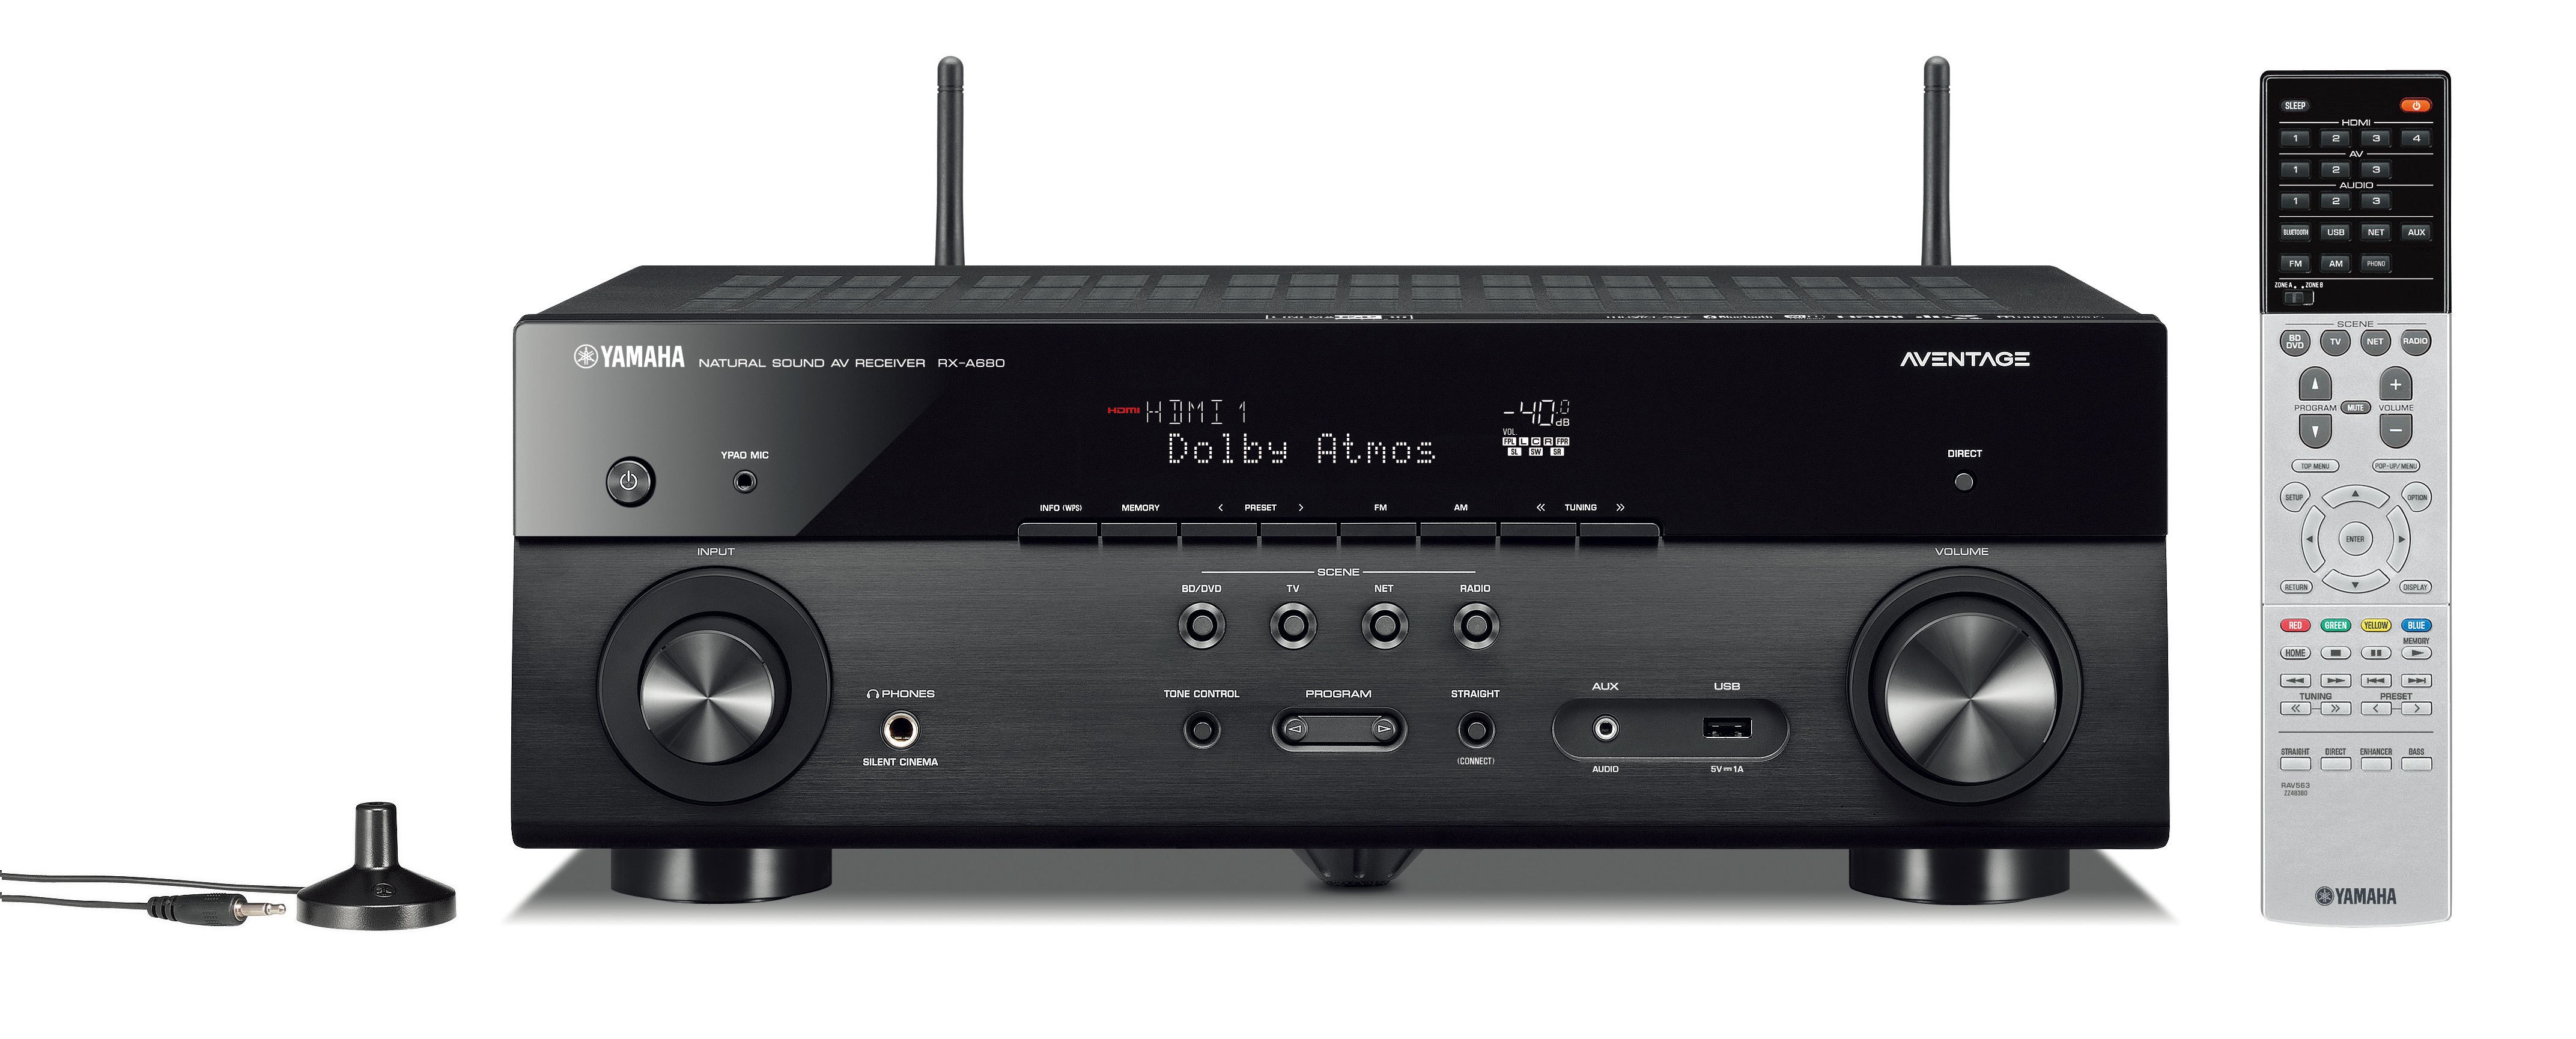 RX-A680 - Specs - AV Receivers - Audio & Visual - Products 